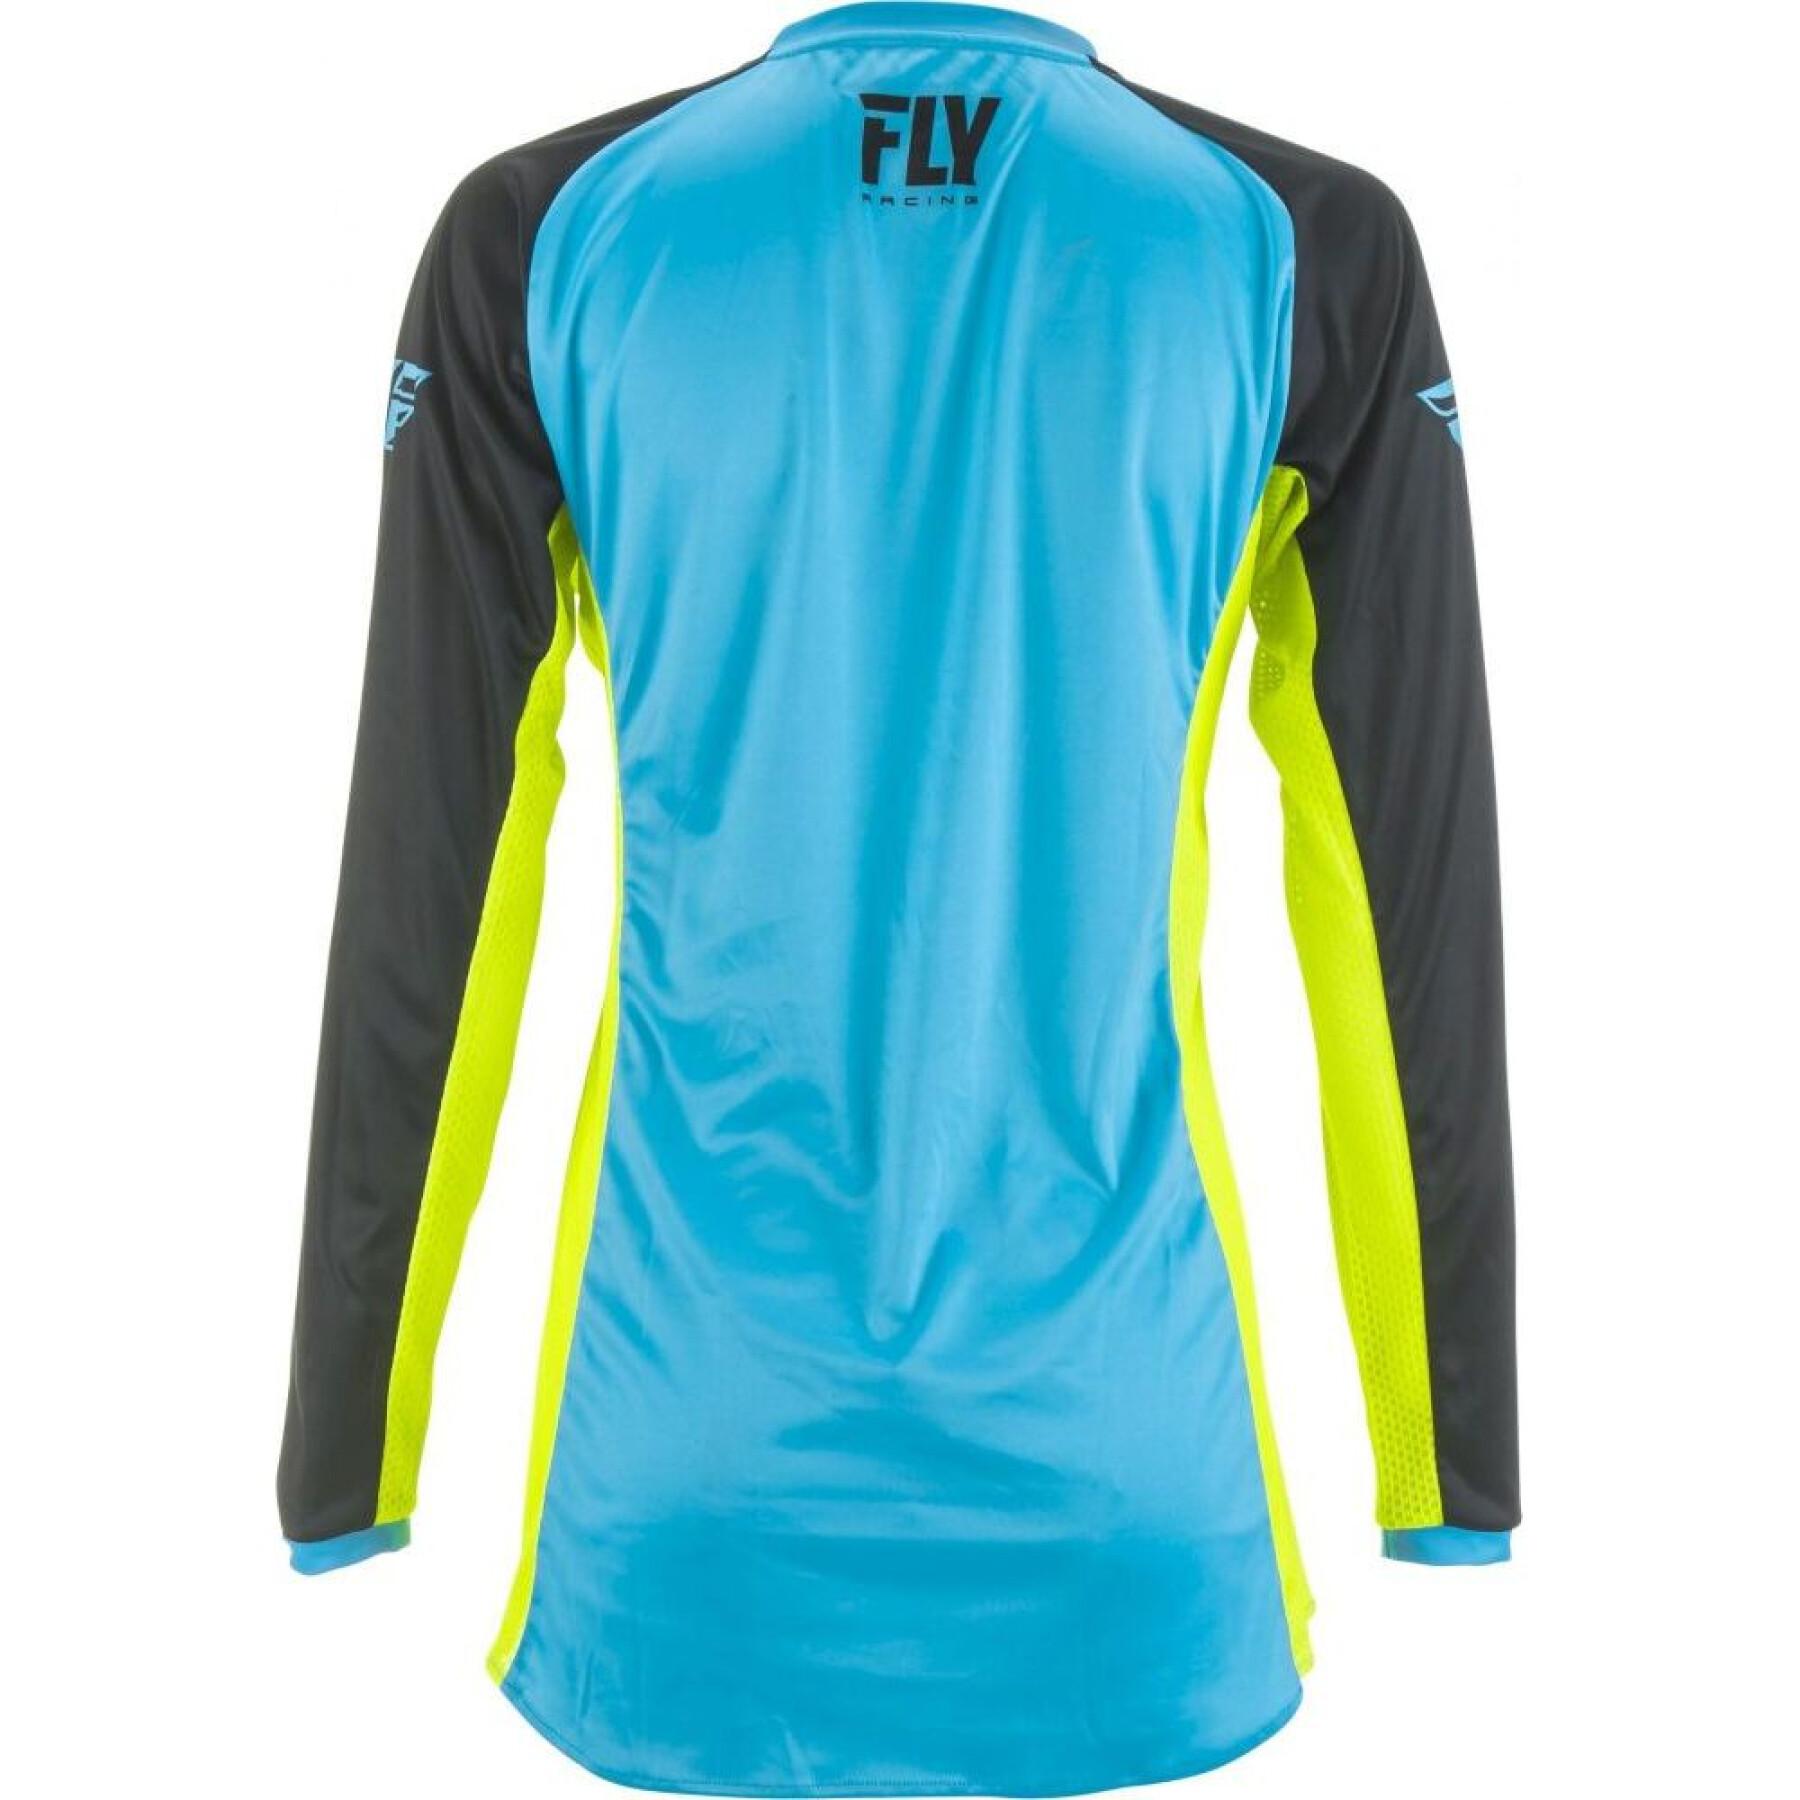 Maillot femme Fly Racing Lite 2019 HP